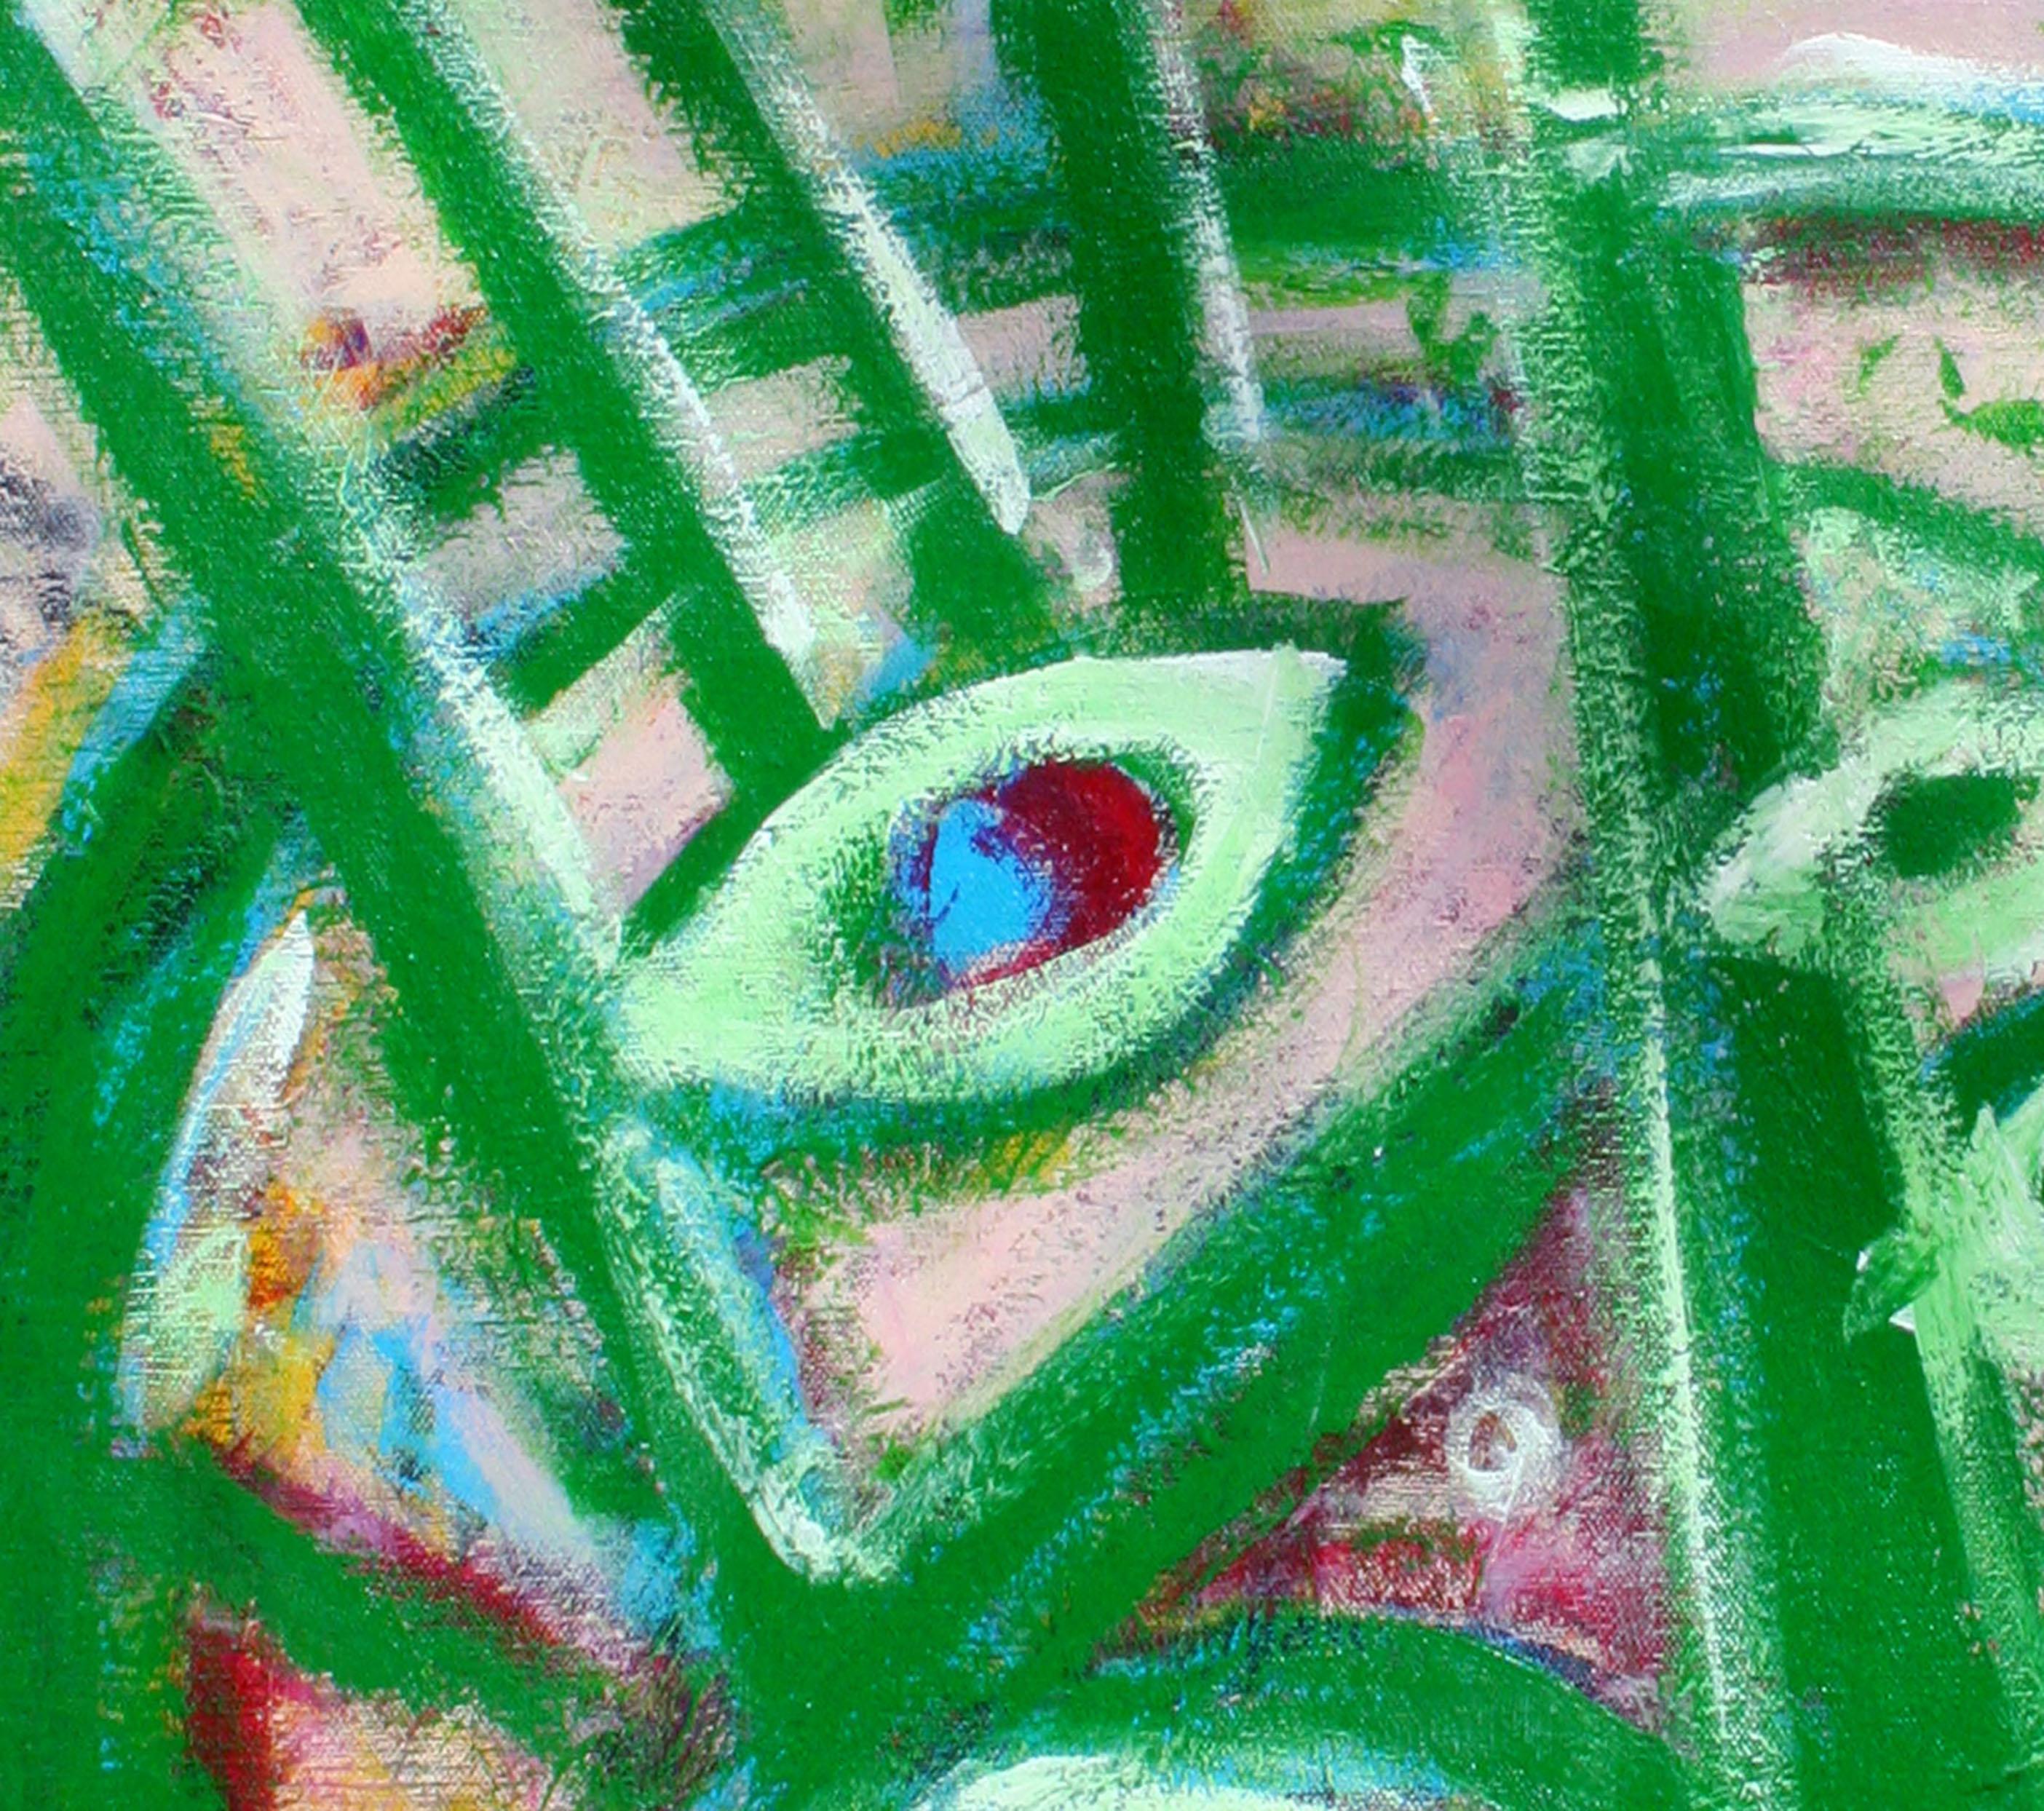 Garden Eyes Abstract  - Abstract Expressionist Painting by Daniel David Fuentes